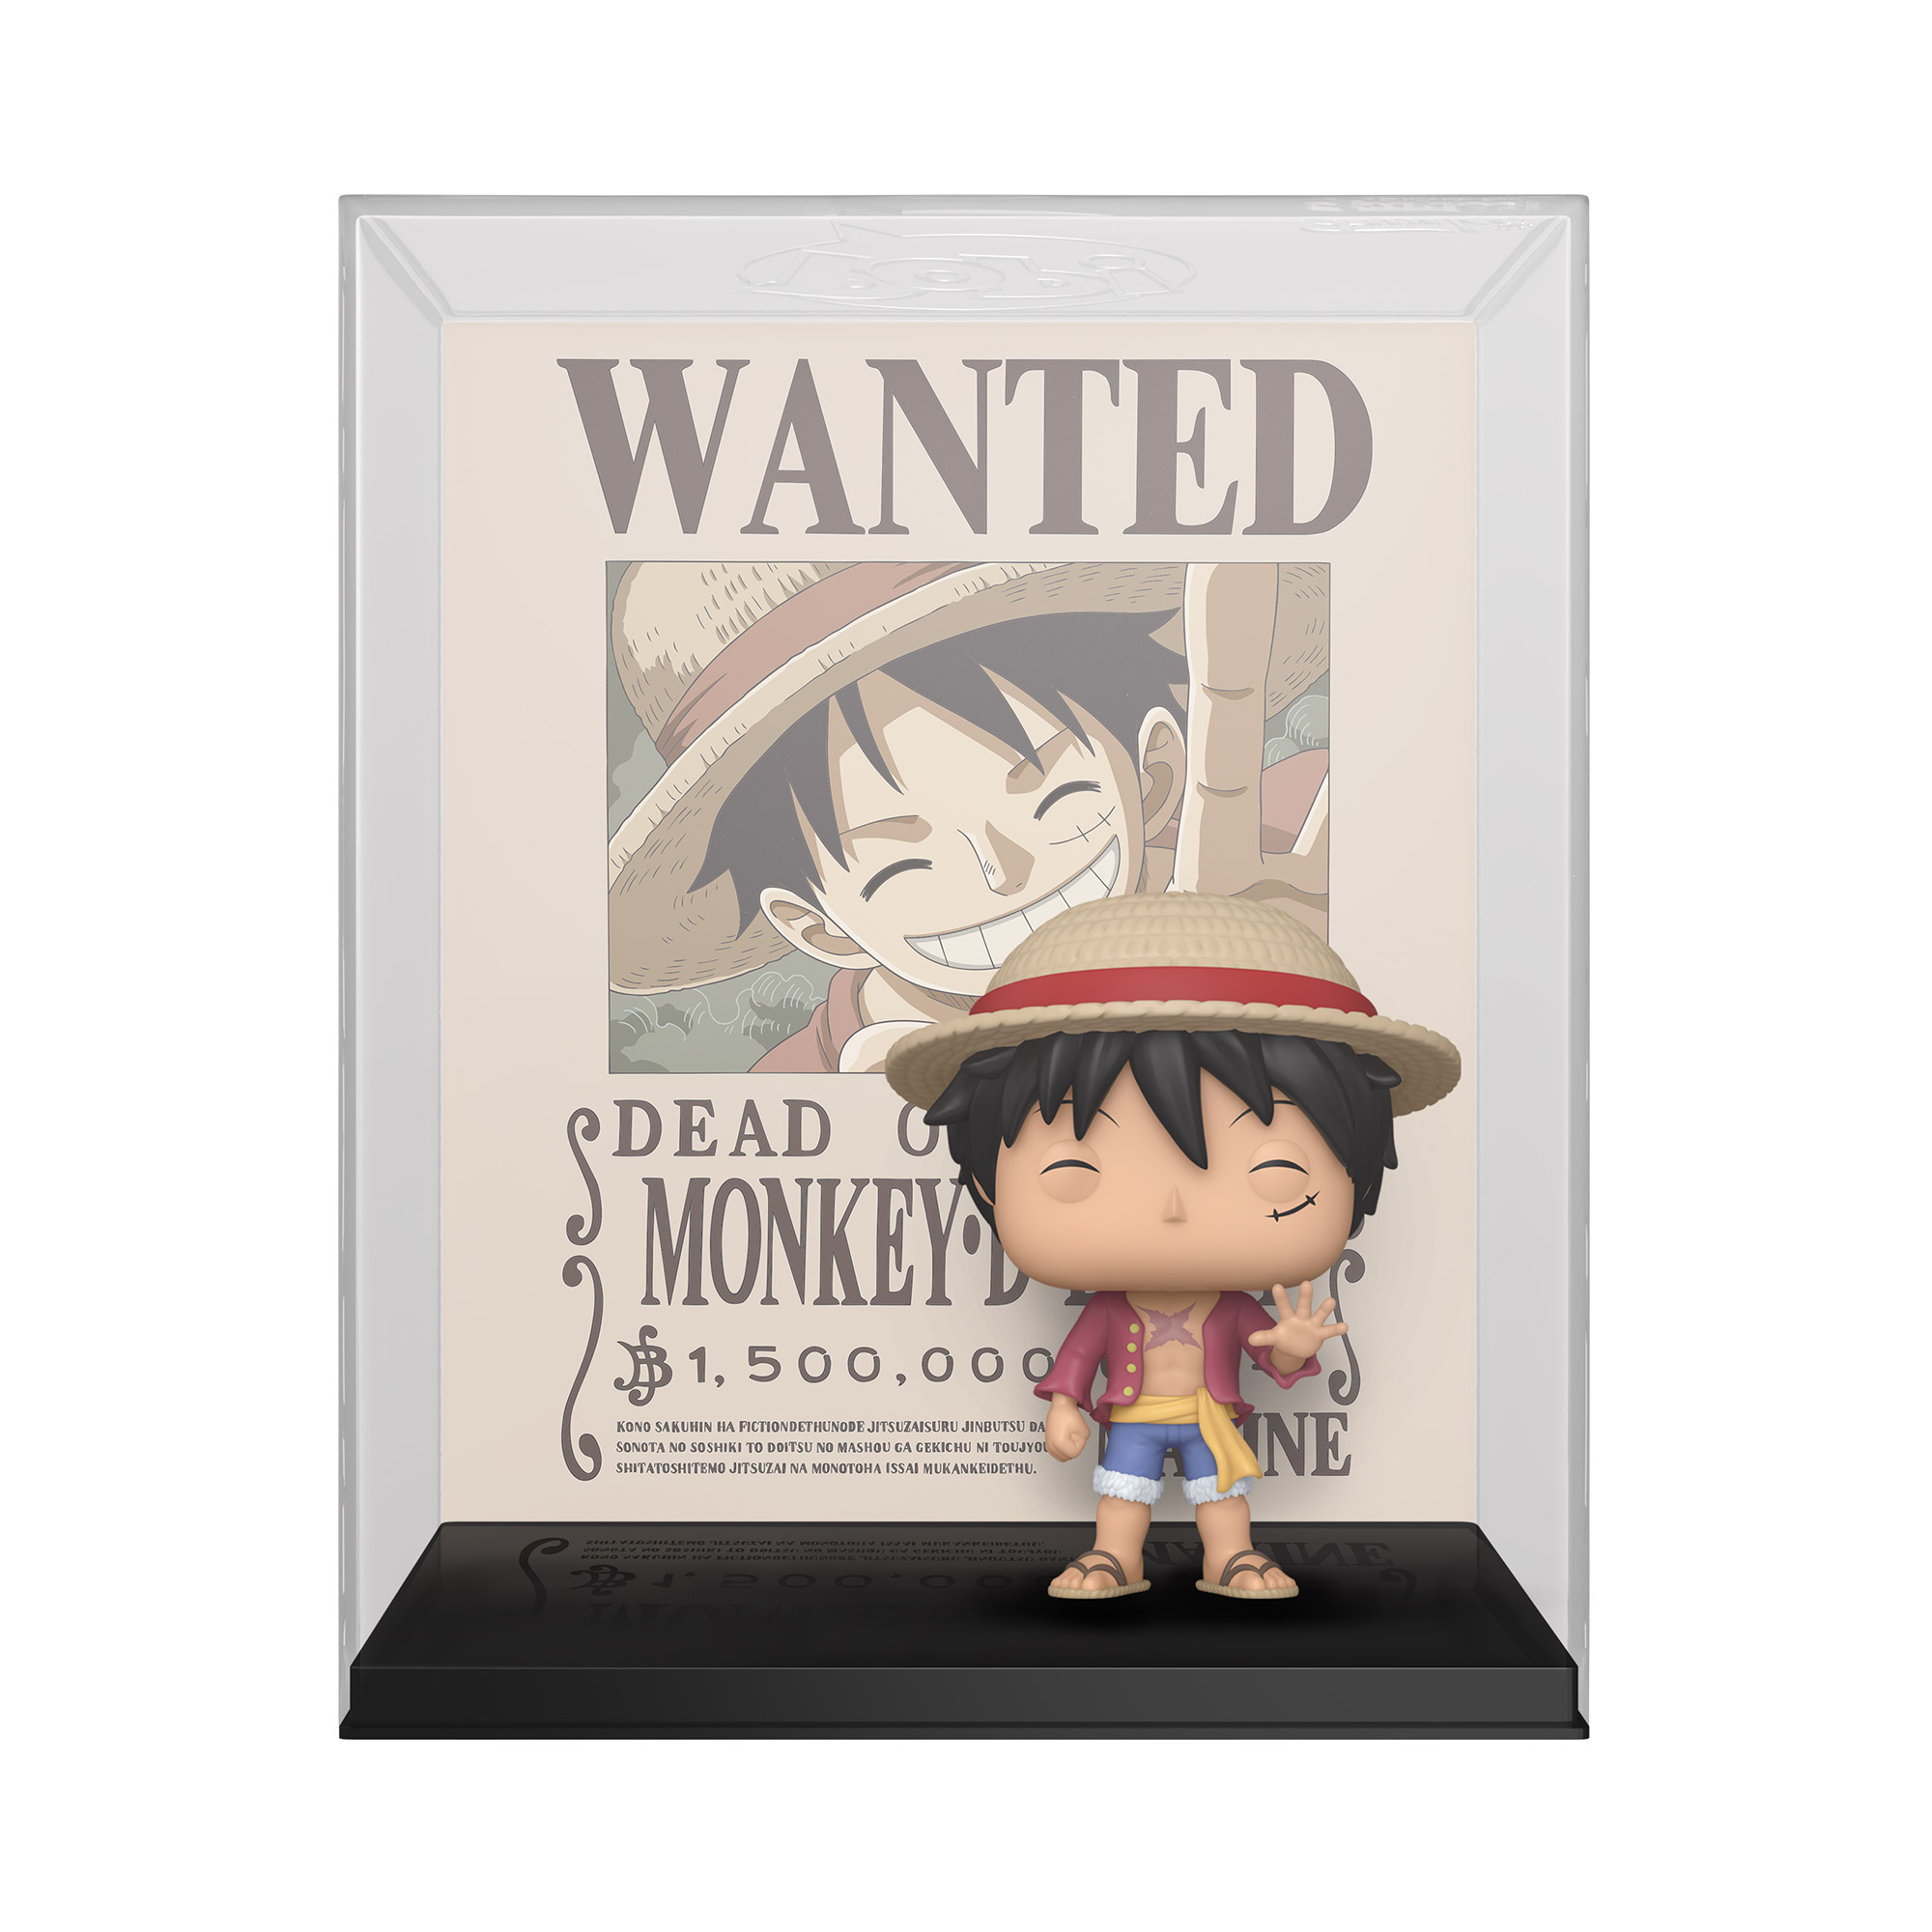 Out-of-box view of NYCC exclusive Pop! Poster Pop! Monkey D. Luffy with Wanted Poster.